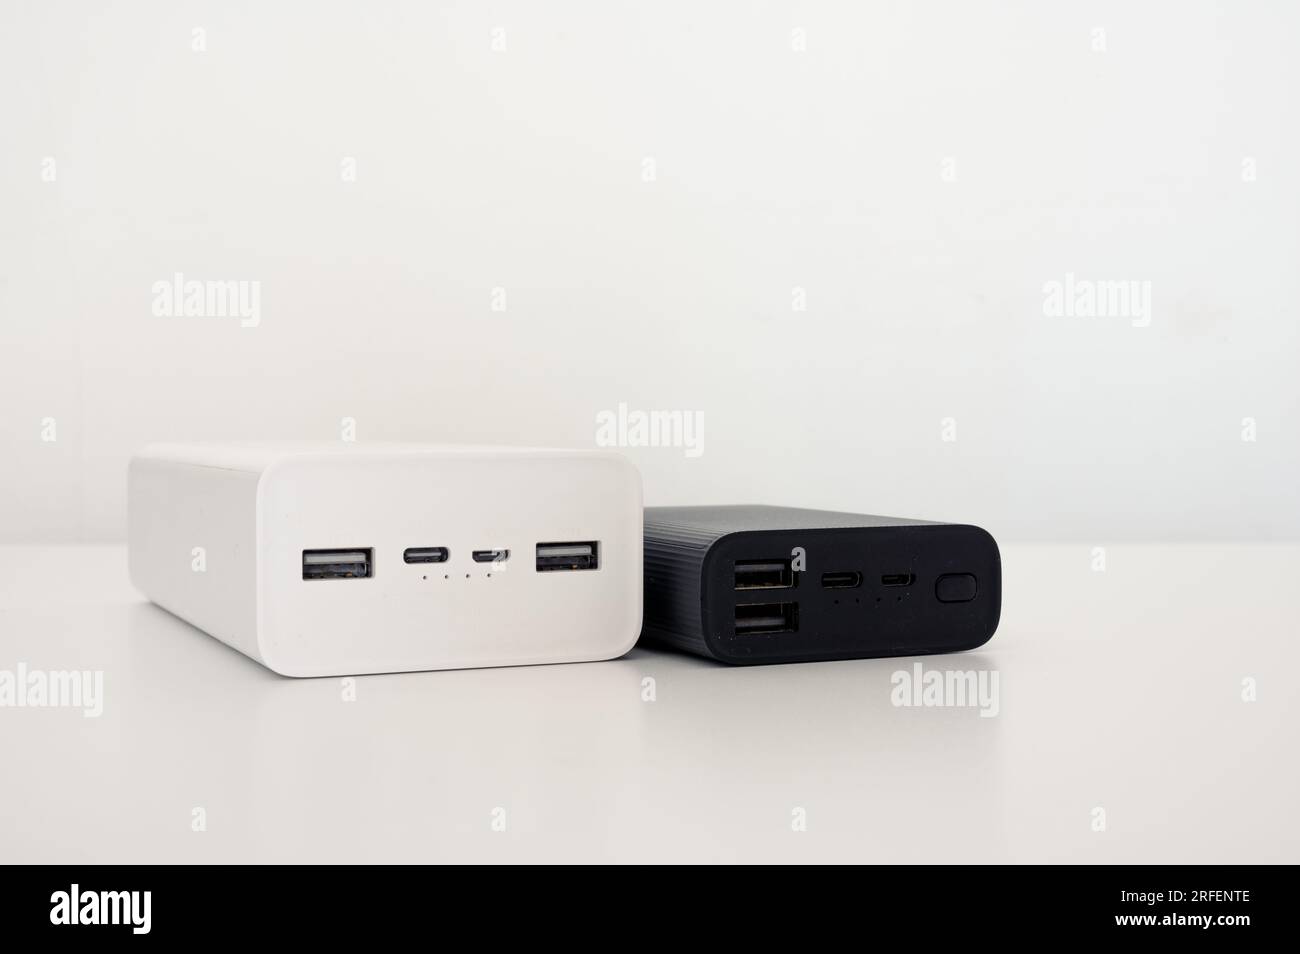 White power bank and black mobile charger on the table. White background. Stock Photo